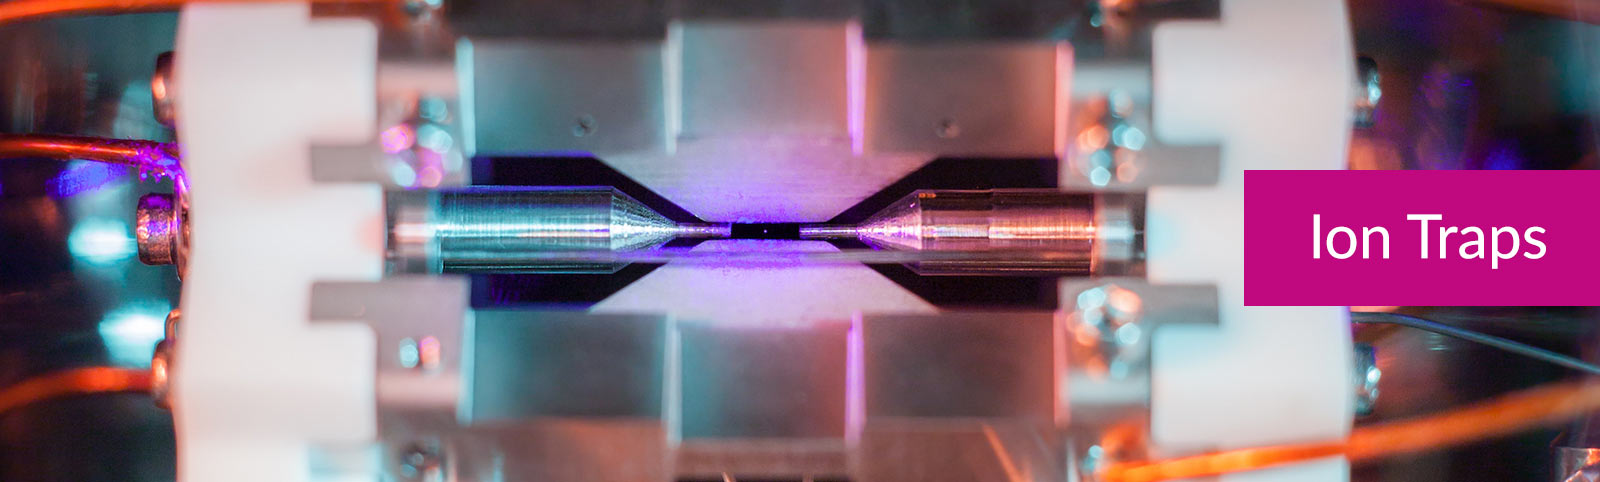 Ion traps banner showing a single atom held in an ion trap